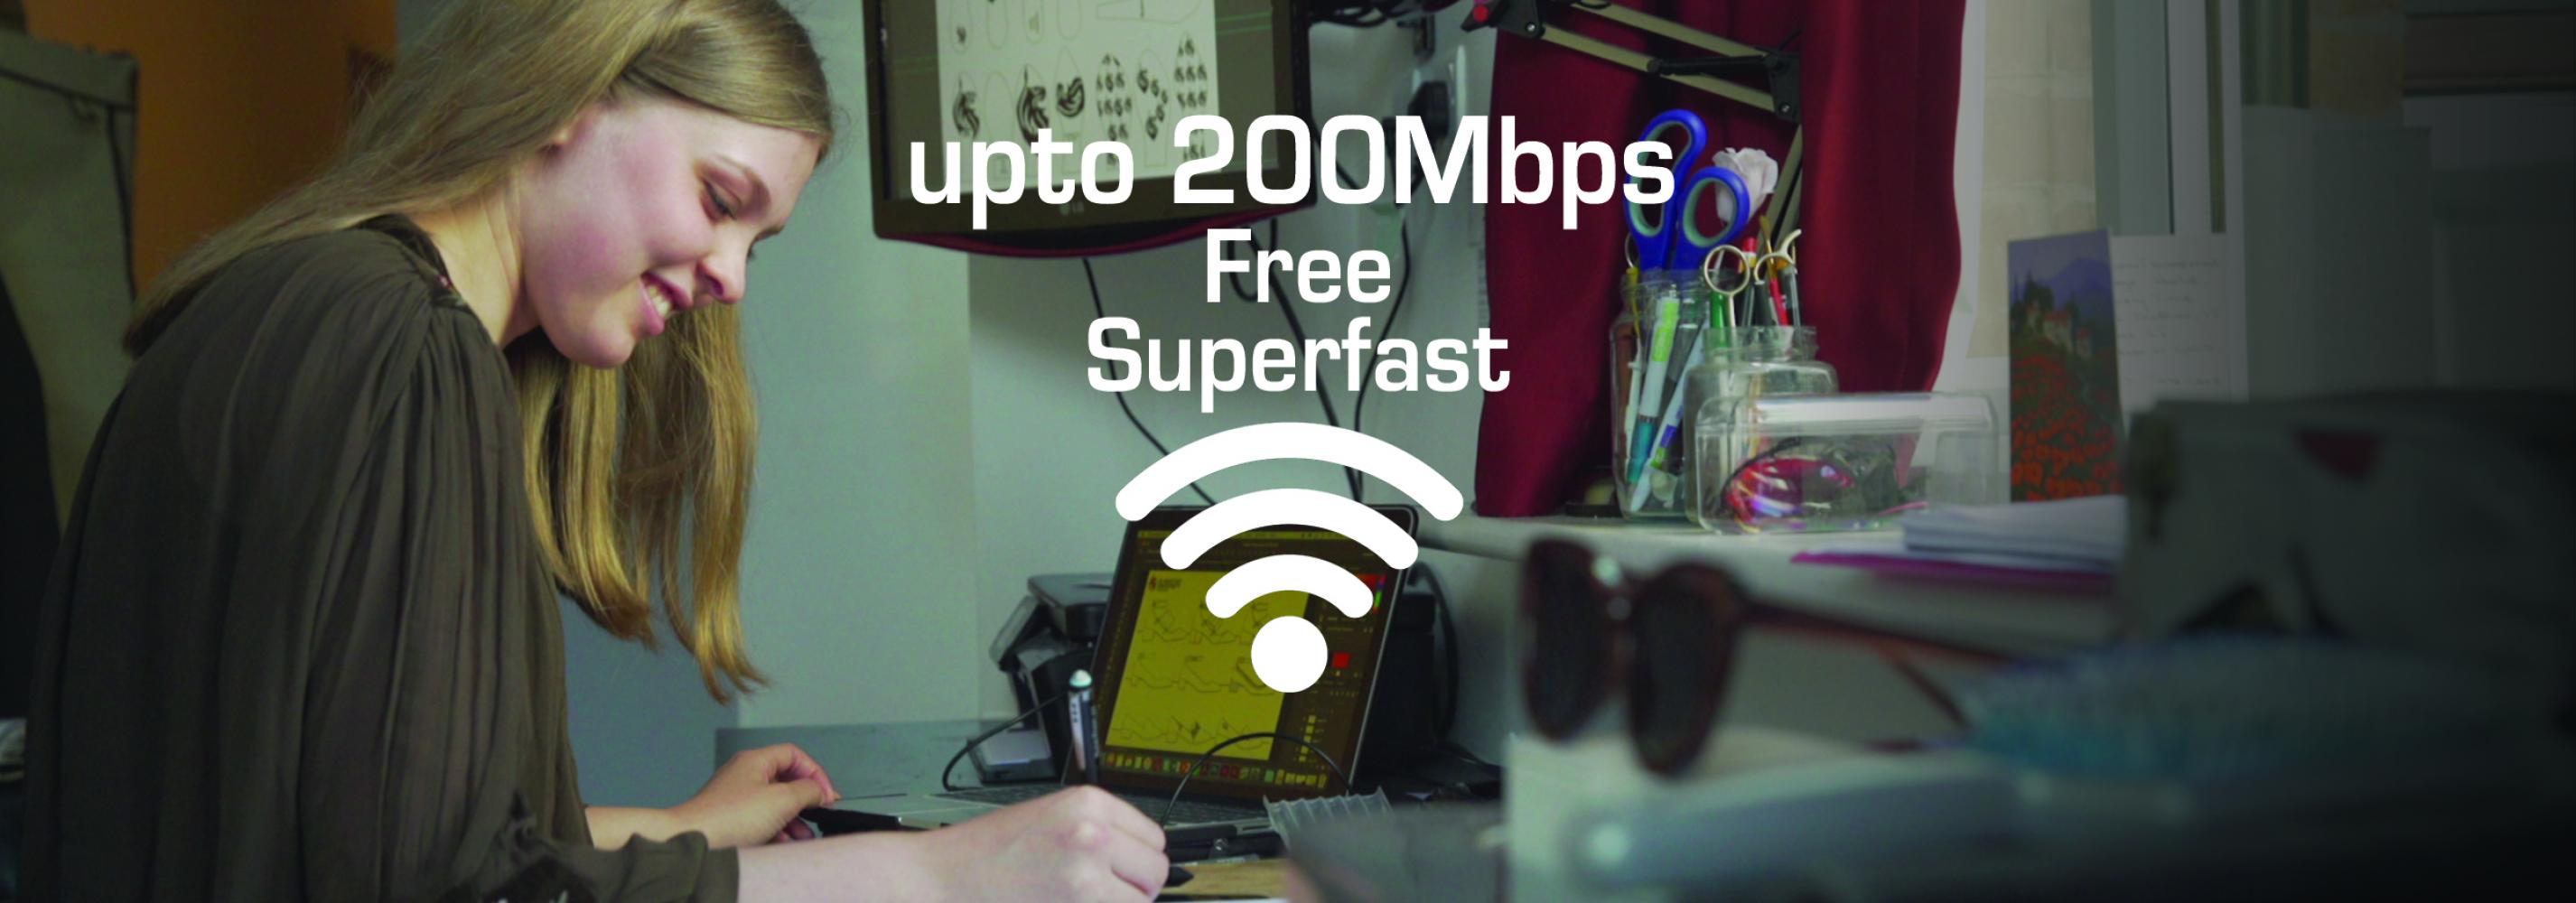 Superfast Wi-fi up to 200Mbps, with no upload and download limits